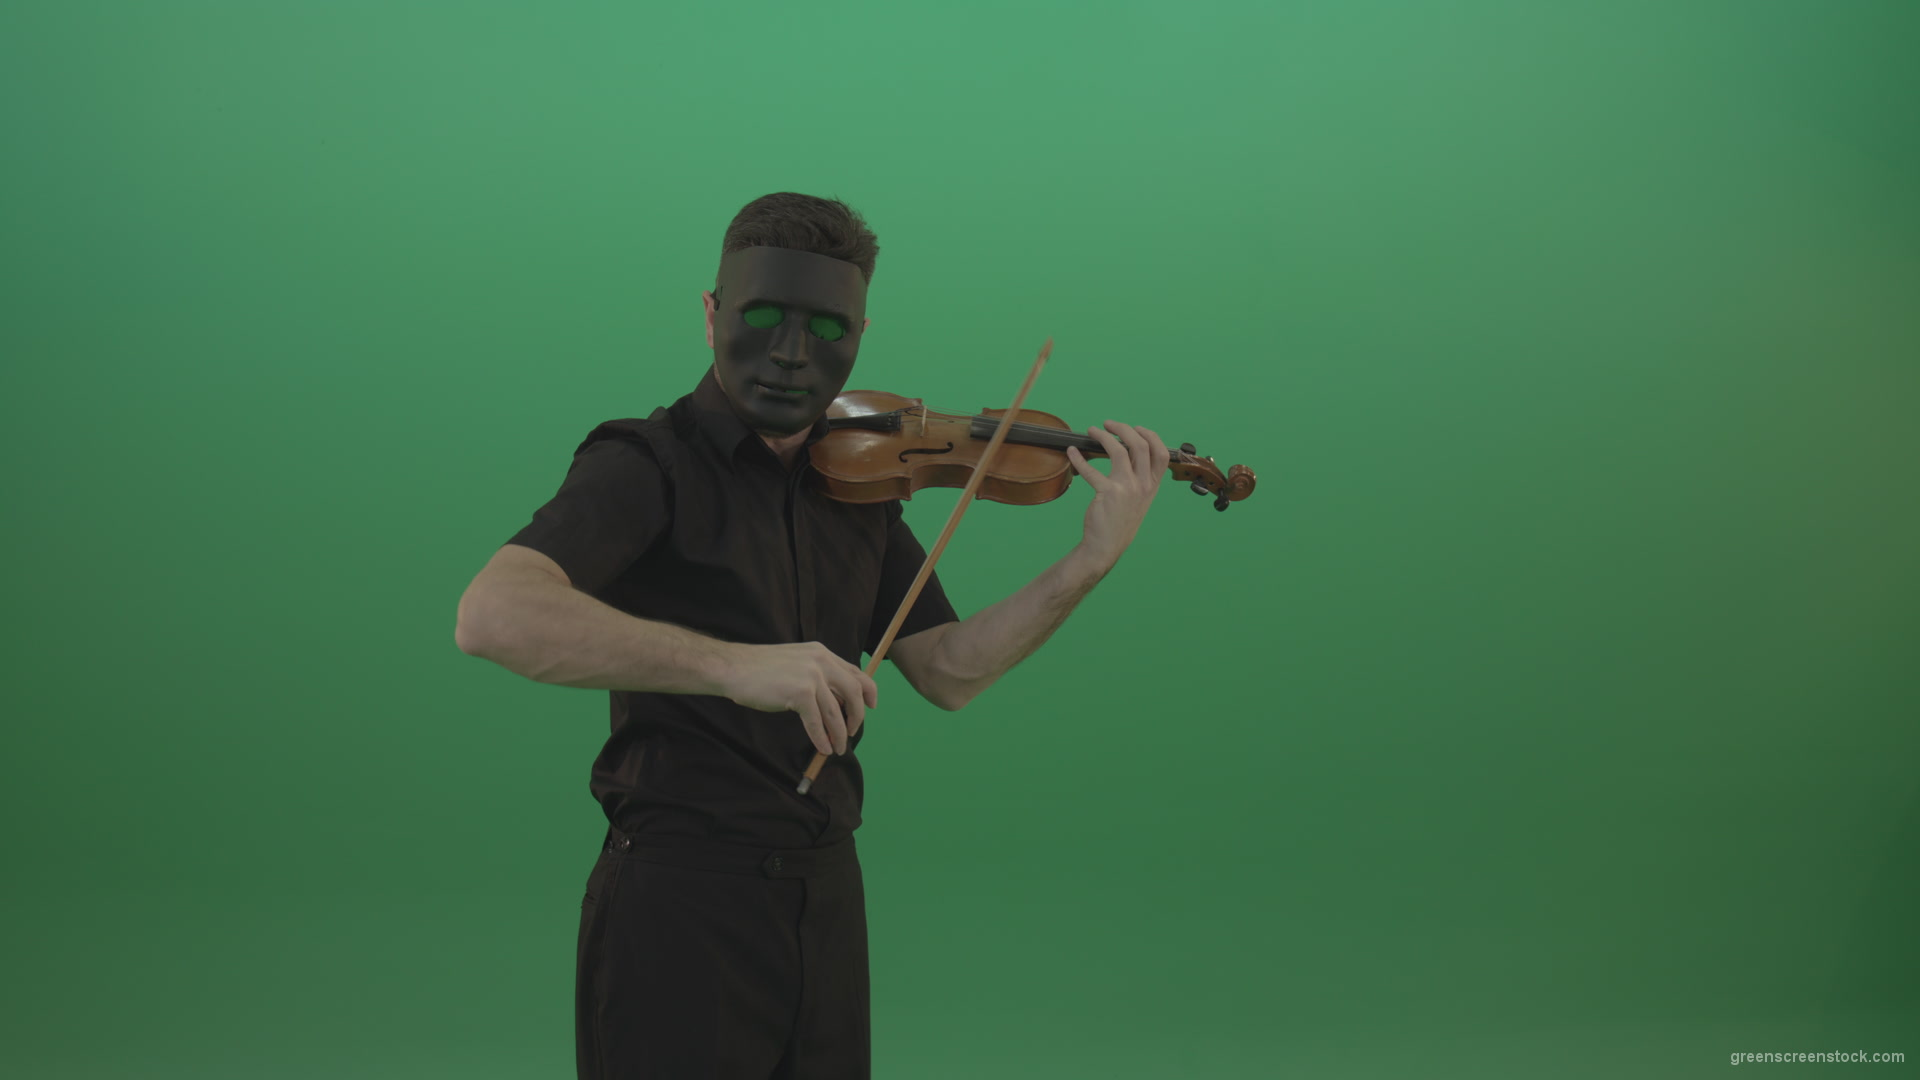 Man-in-black-wear-and-mask-play-violin-fiddle-strings-gothic-dark-music-isolated-on-green-screen_006 Green Screen Stock